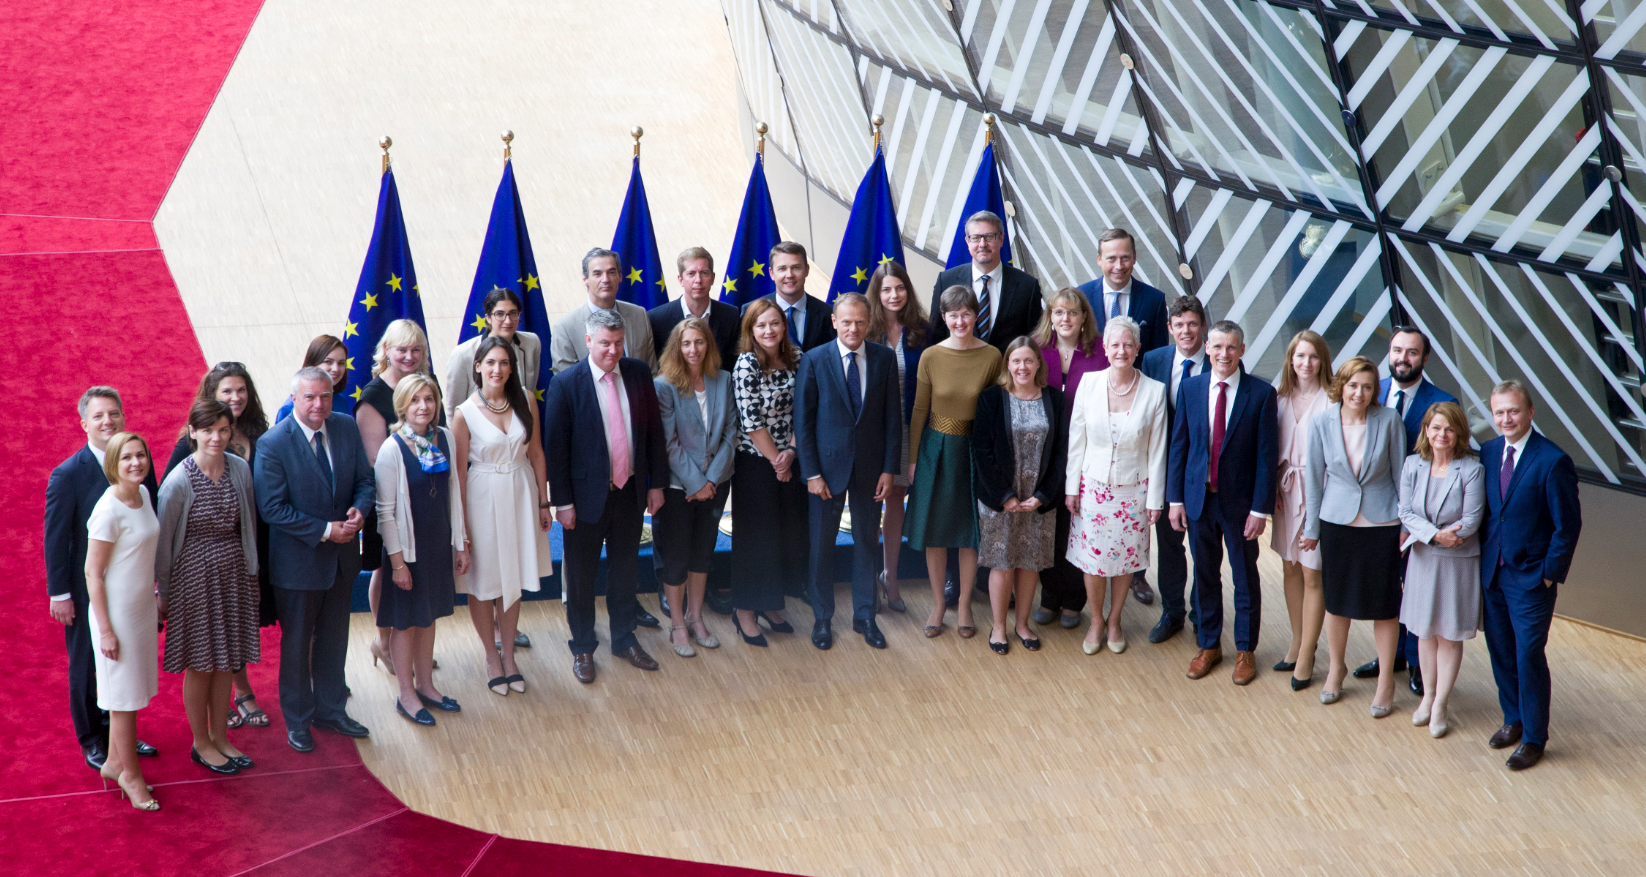 The start of the second mandate of the cabinet of Donald Tusk. Riina Kionka is eighth from the right. © European Union